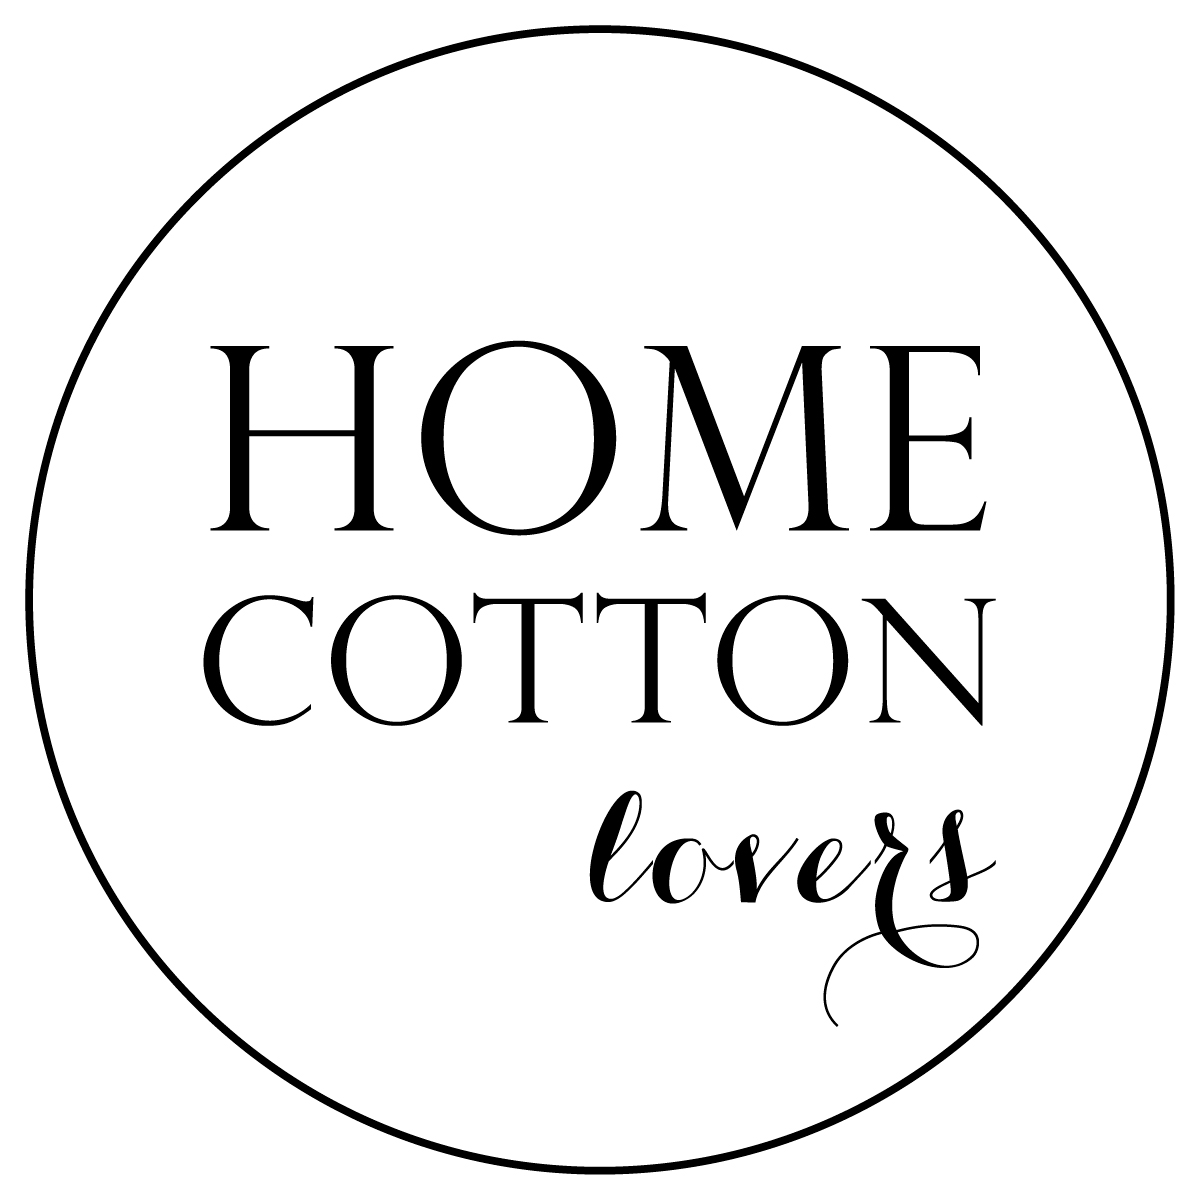 Home Cotton Lovers